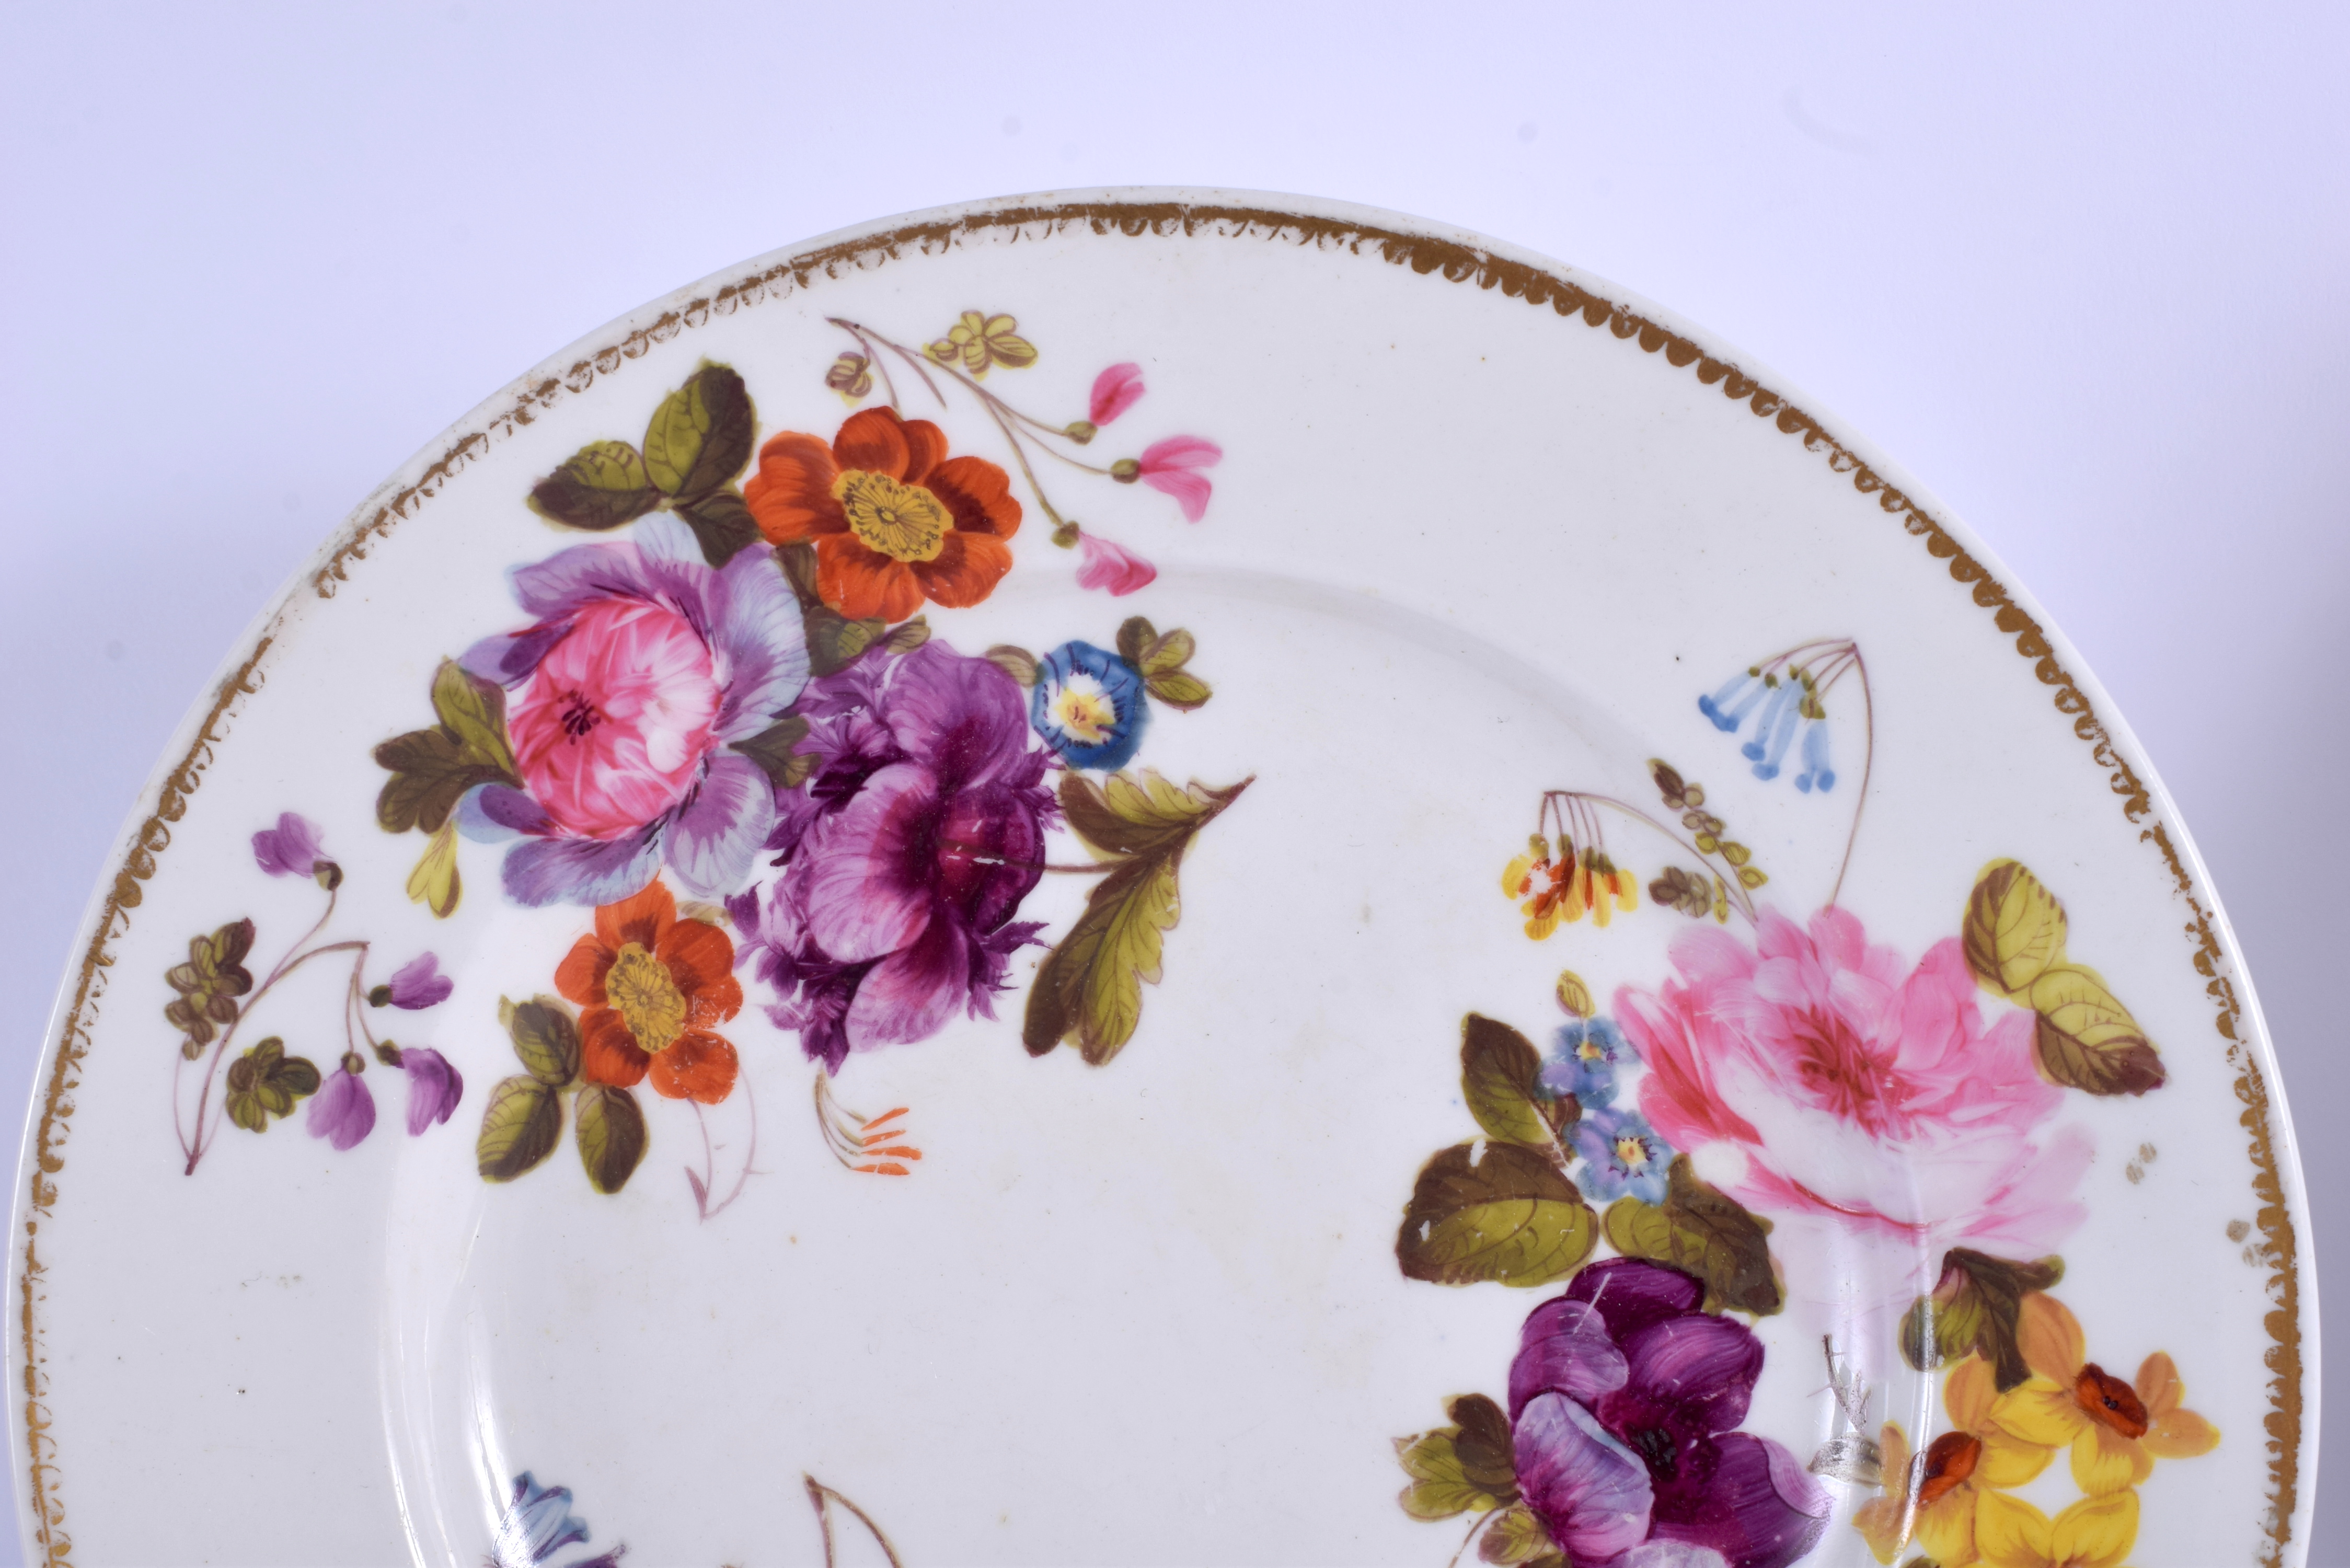 A PAIR OF EARLY 19TH CENTURY DERBY PORCELAIN PLATES painted with botanical sprays. 20 cm diameter. - Image 4 of 8